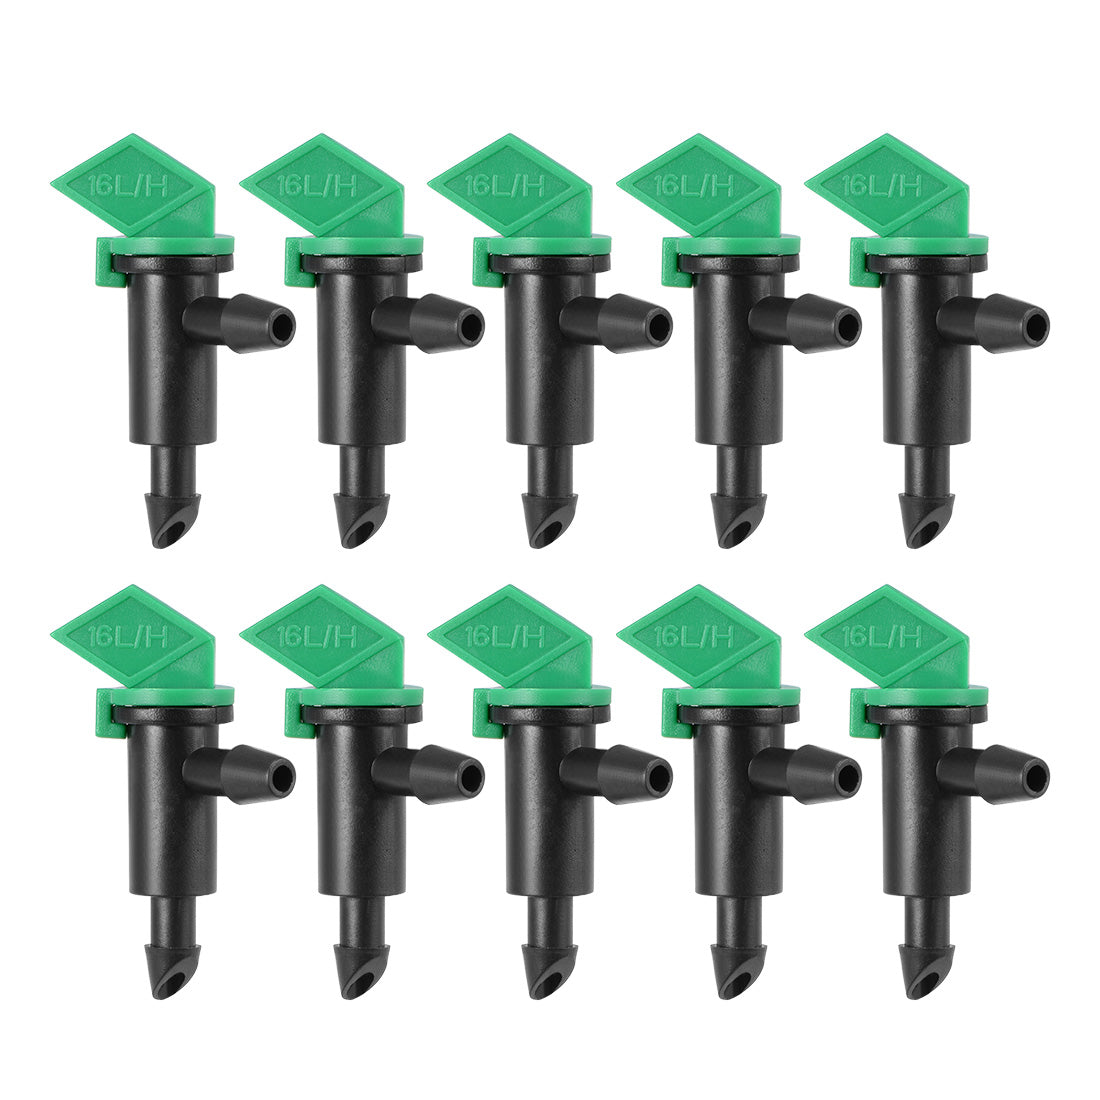 uxcell Uxcell Flag Dripper 4 GPH 16L/H Emitter Sprinkler for Garden Lawn Drip Irrigation Connect 4/7mm Hose, Plastic 25pcs